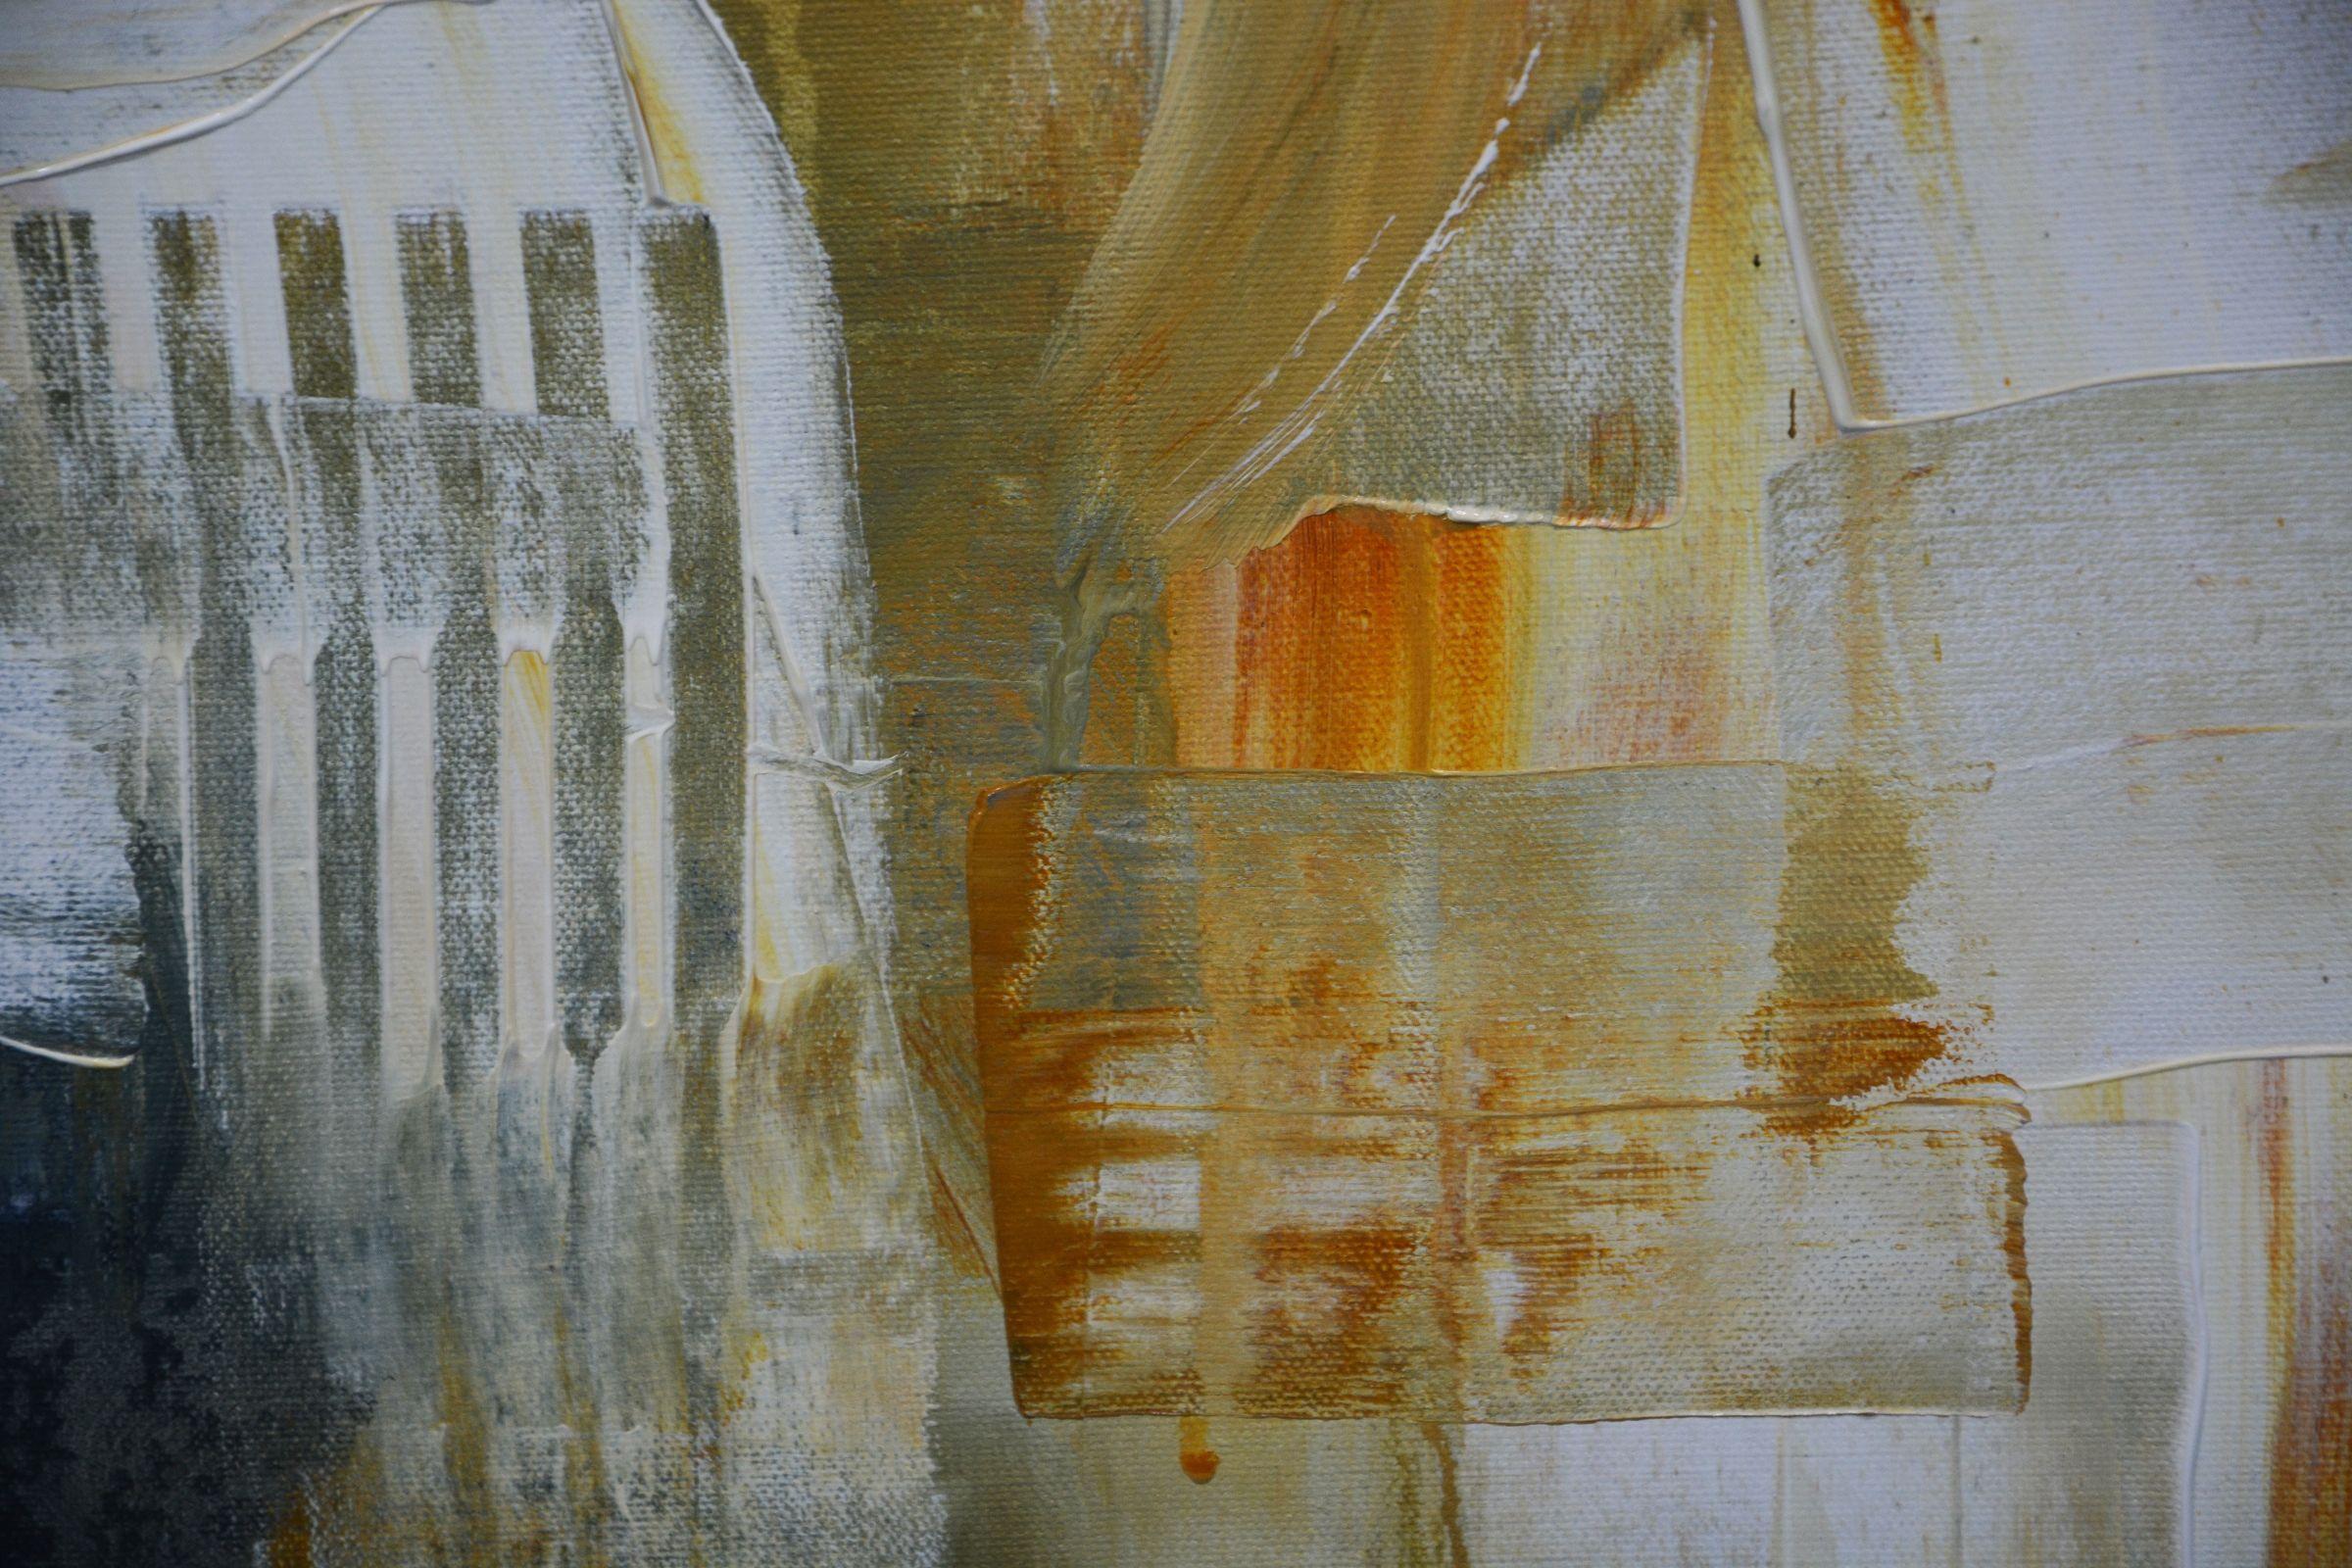 Structures series - The city under a piece of sky, Mixed Media on Canvas - Abstract Mixed Media Art by Andrada Anghel